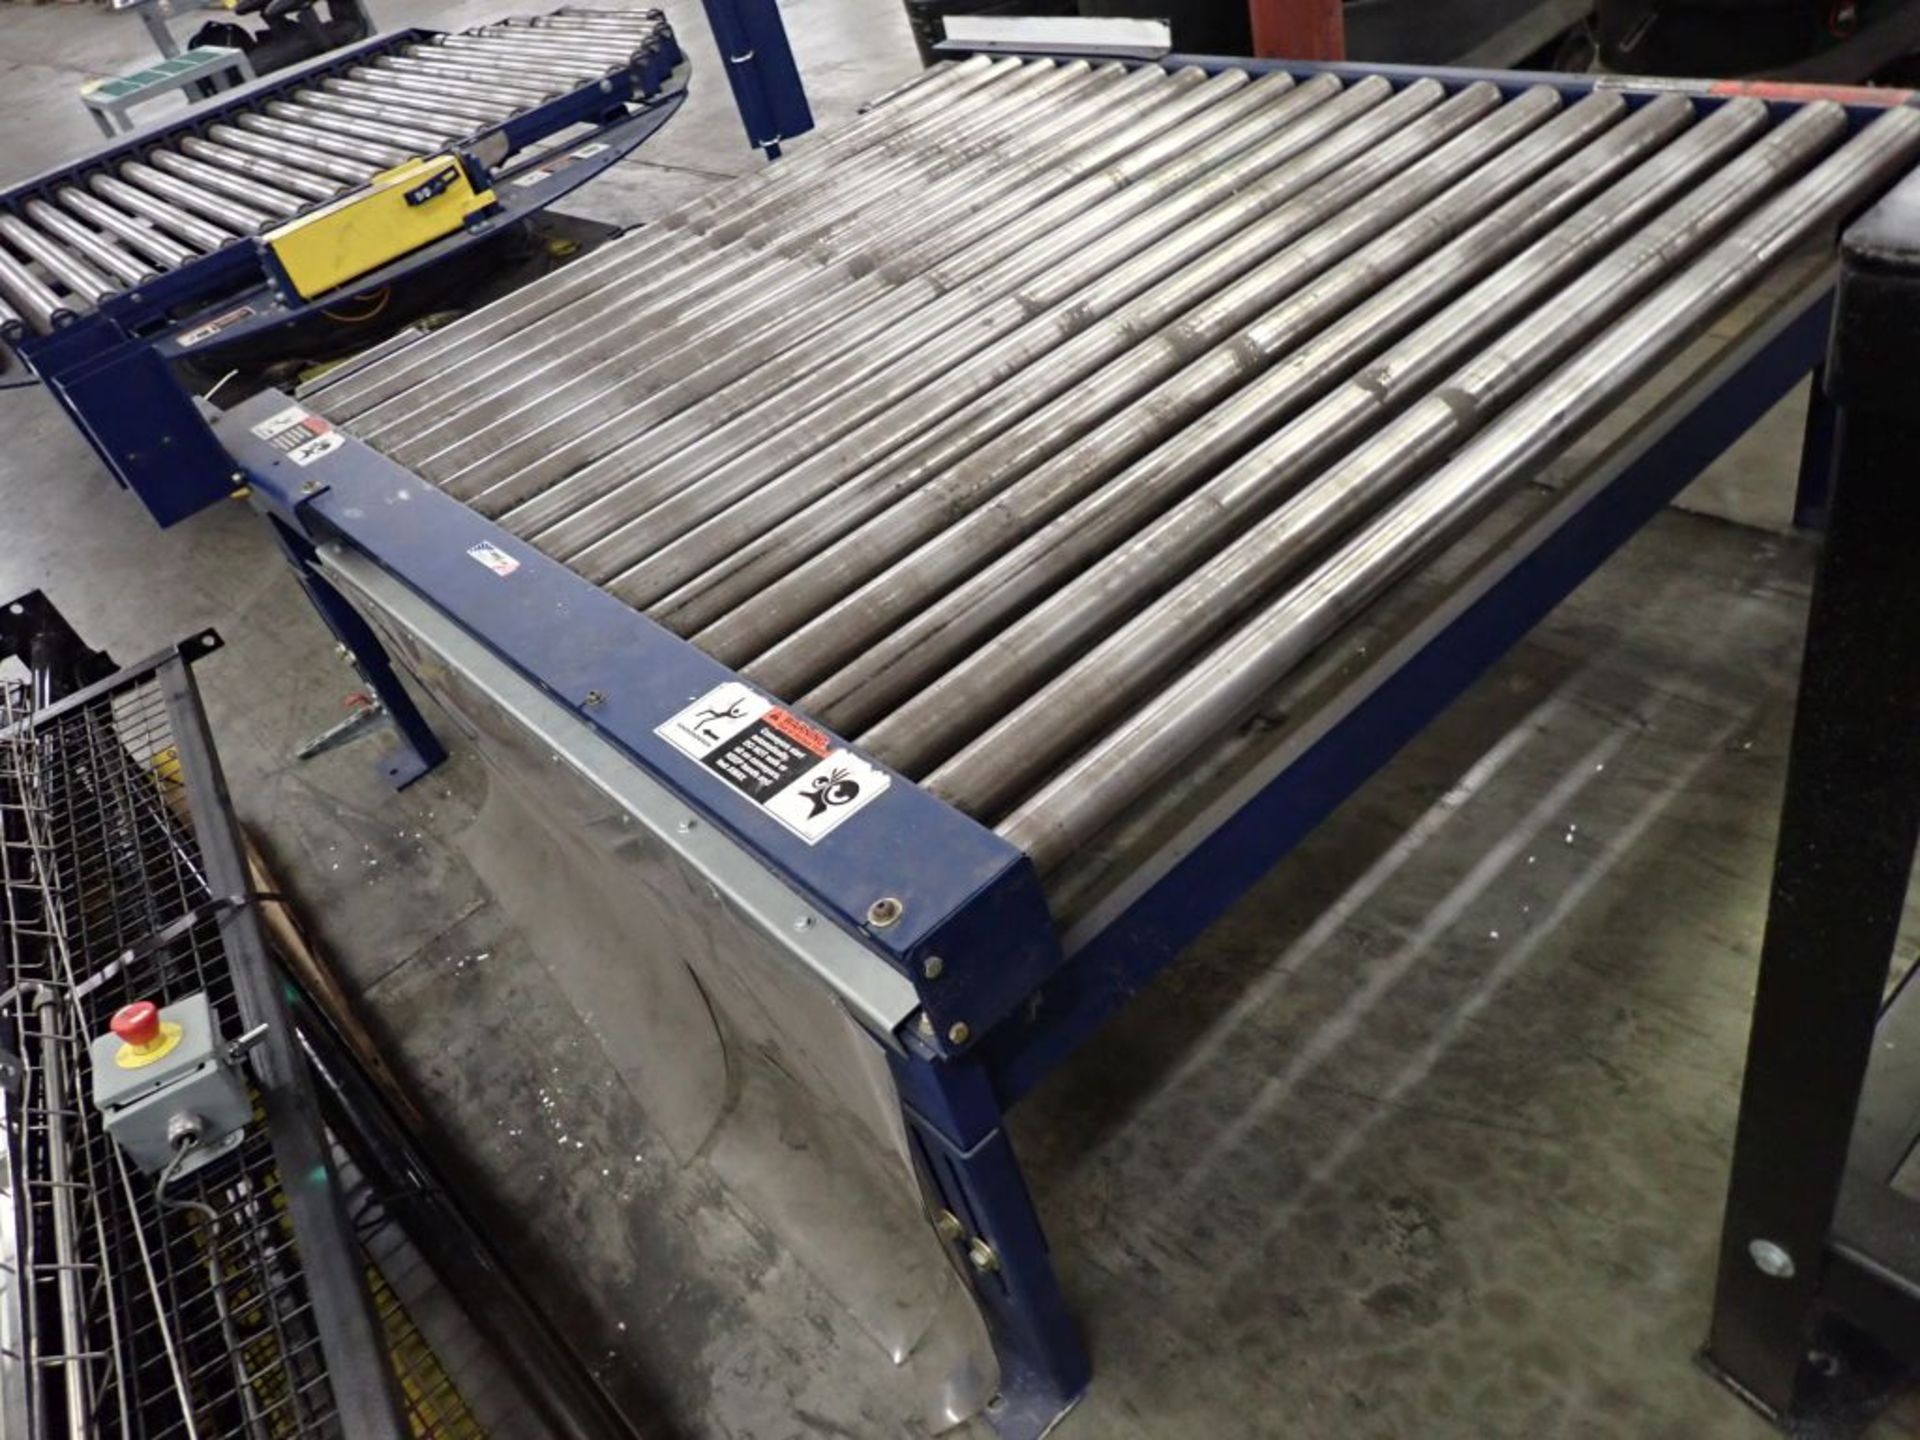 Lantech Pallet Wrapping System with Infeed and Outfeed Conveyor - Image 72 of 99